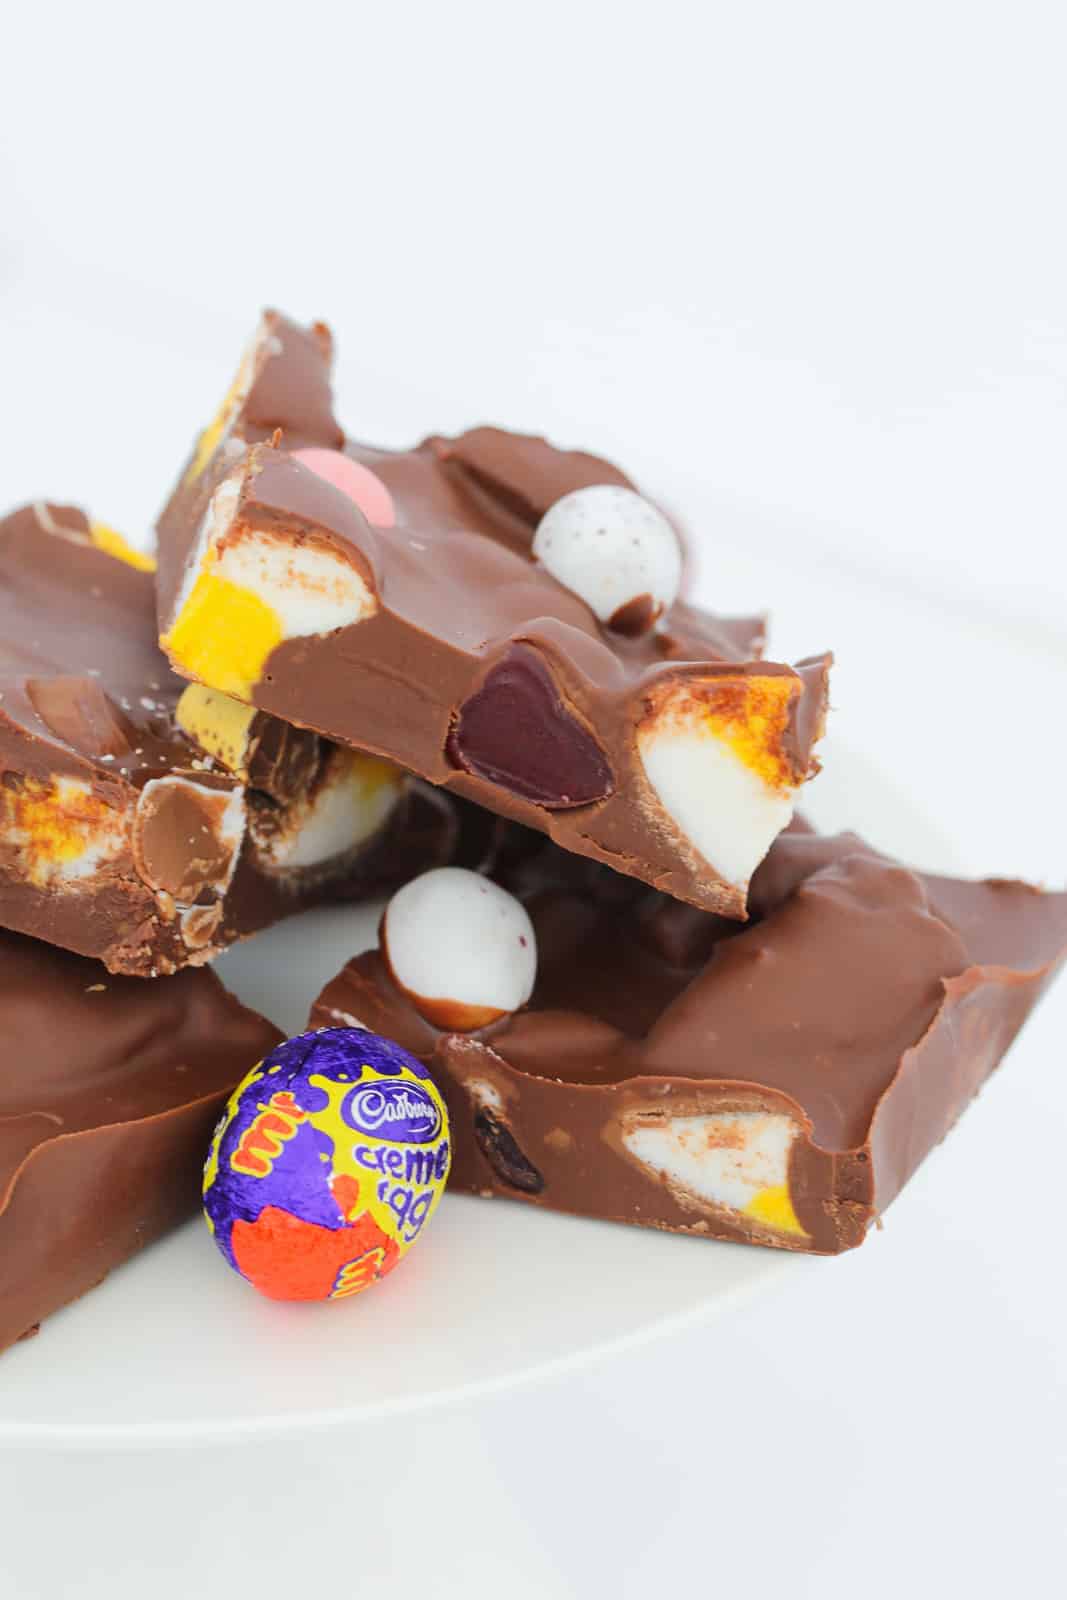 Pieces of Easter rocky road filled with raspberry lollies, Creme Eggs and marshmallows.